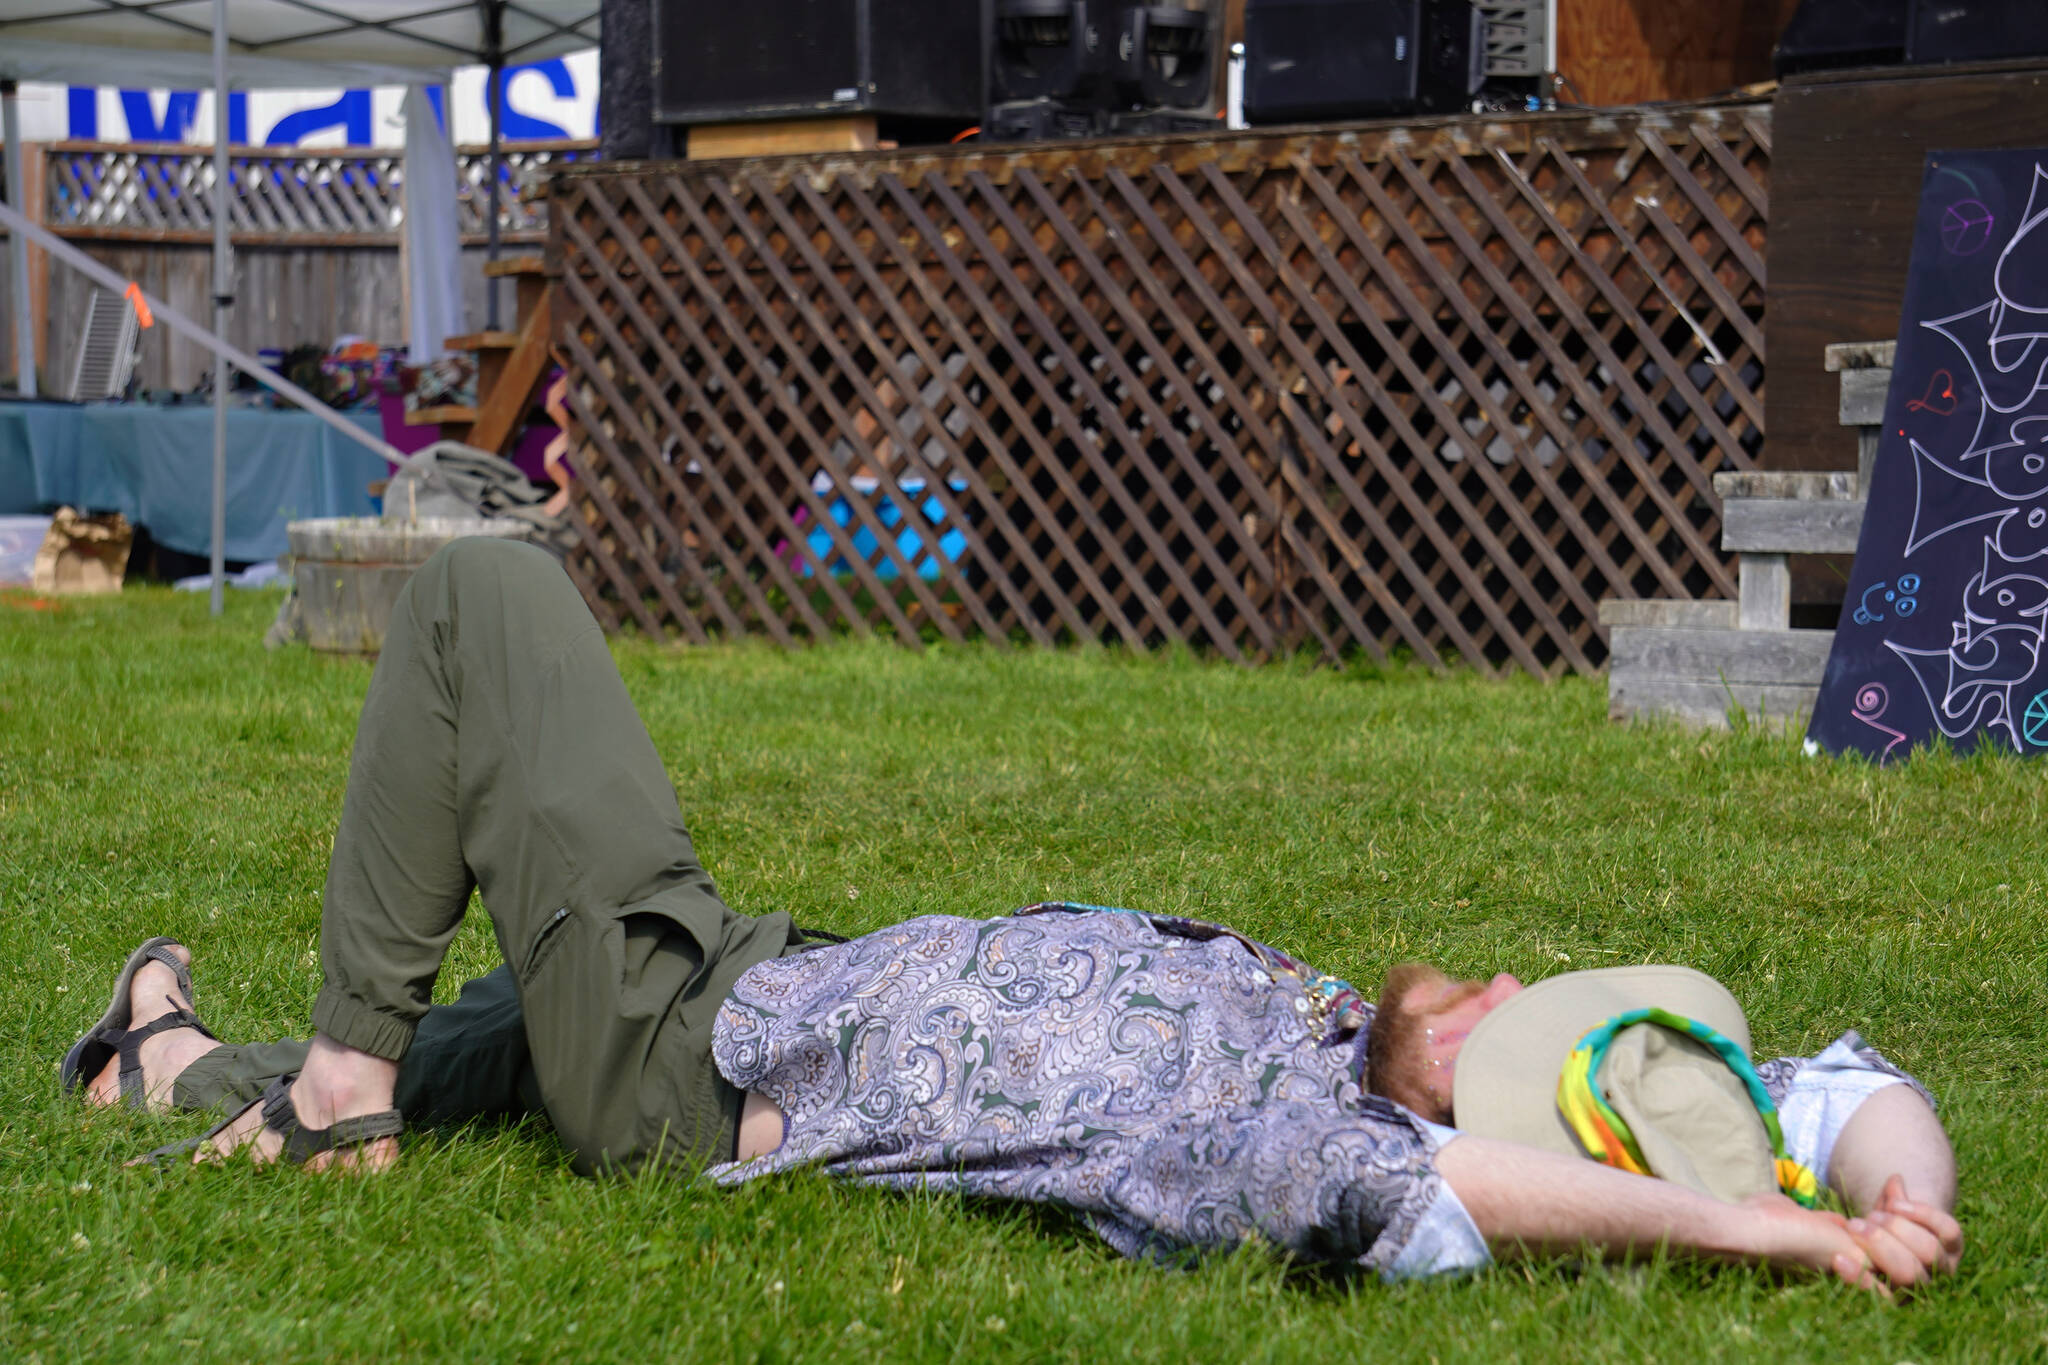 An attendee dozes between performances on the Ocean Stage at Salmonfest in Ninilchik, Alaska, on Friday, Aug. 4, 2023. (Jake Dye/Peninsula Clarion)
An attendee dozes between performances on the Ocean Stage at Salmonfest in Ninilchik, Alaska, on Friday, Aug. 4, 2023. (Jake Dye/Peninsula Clarion)